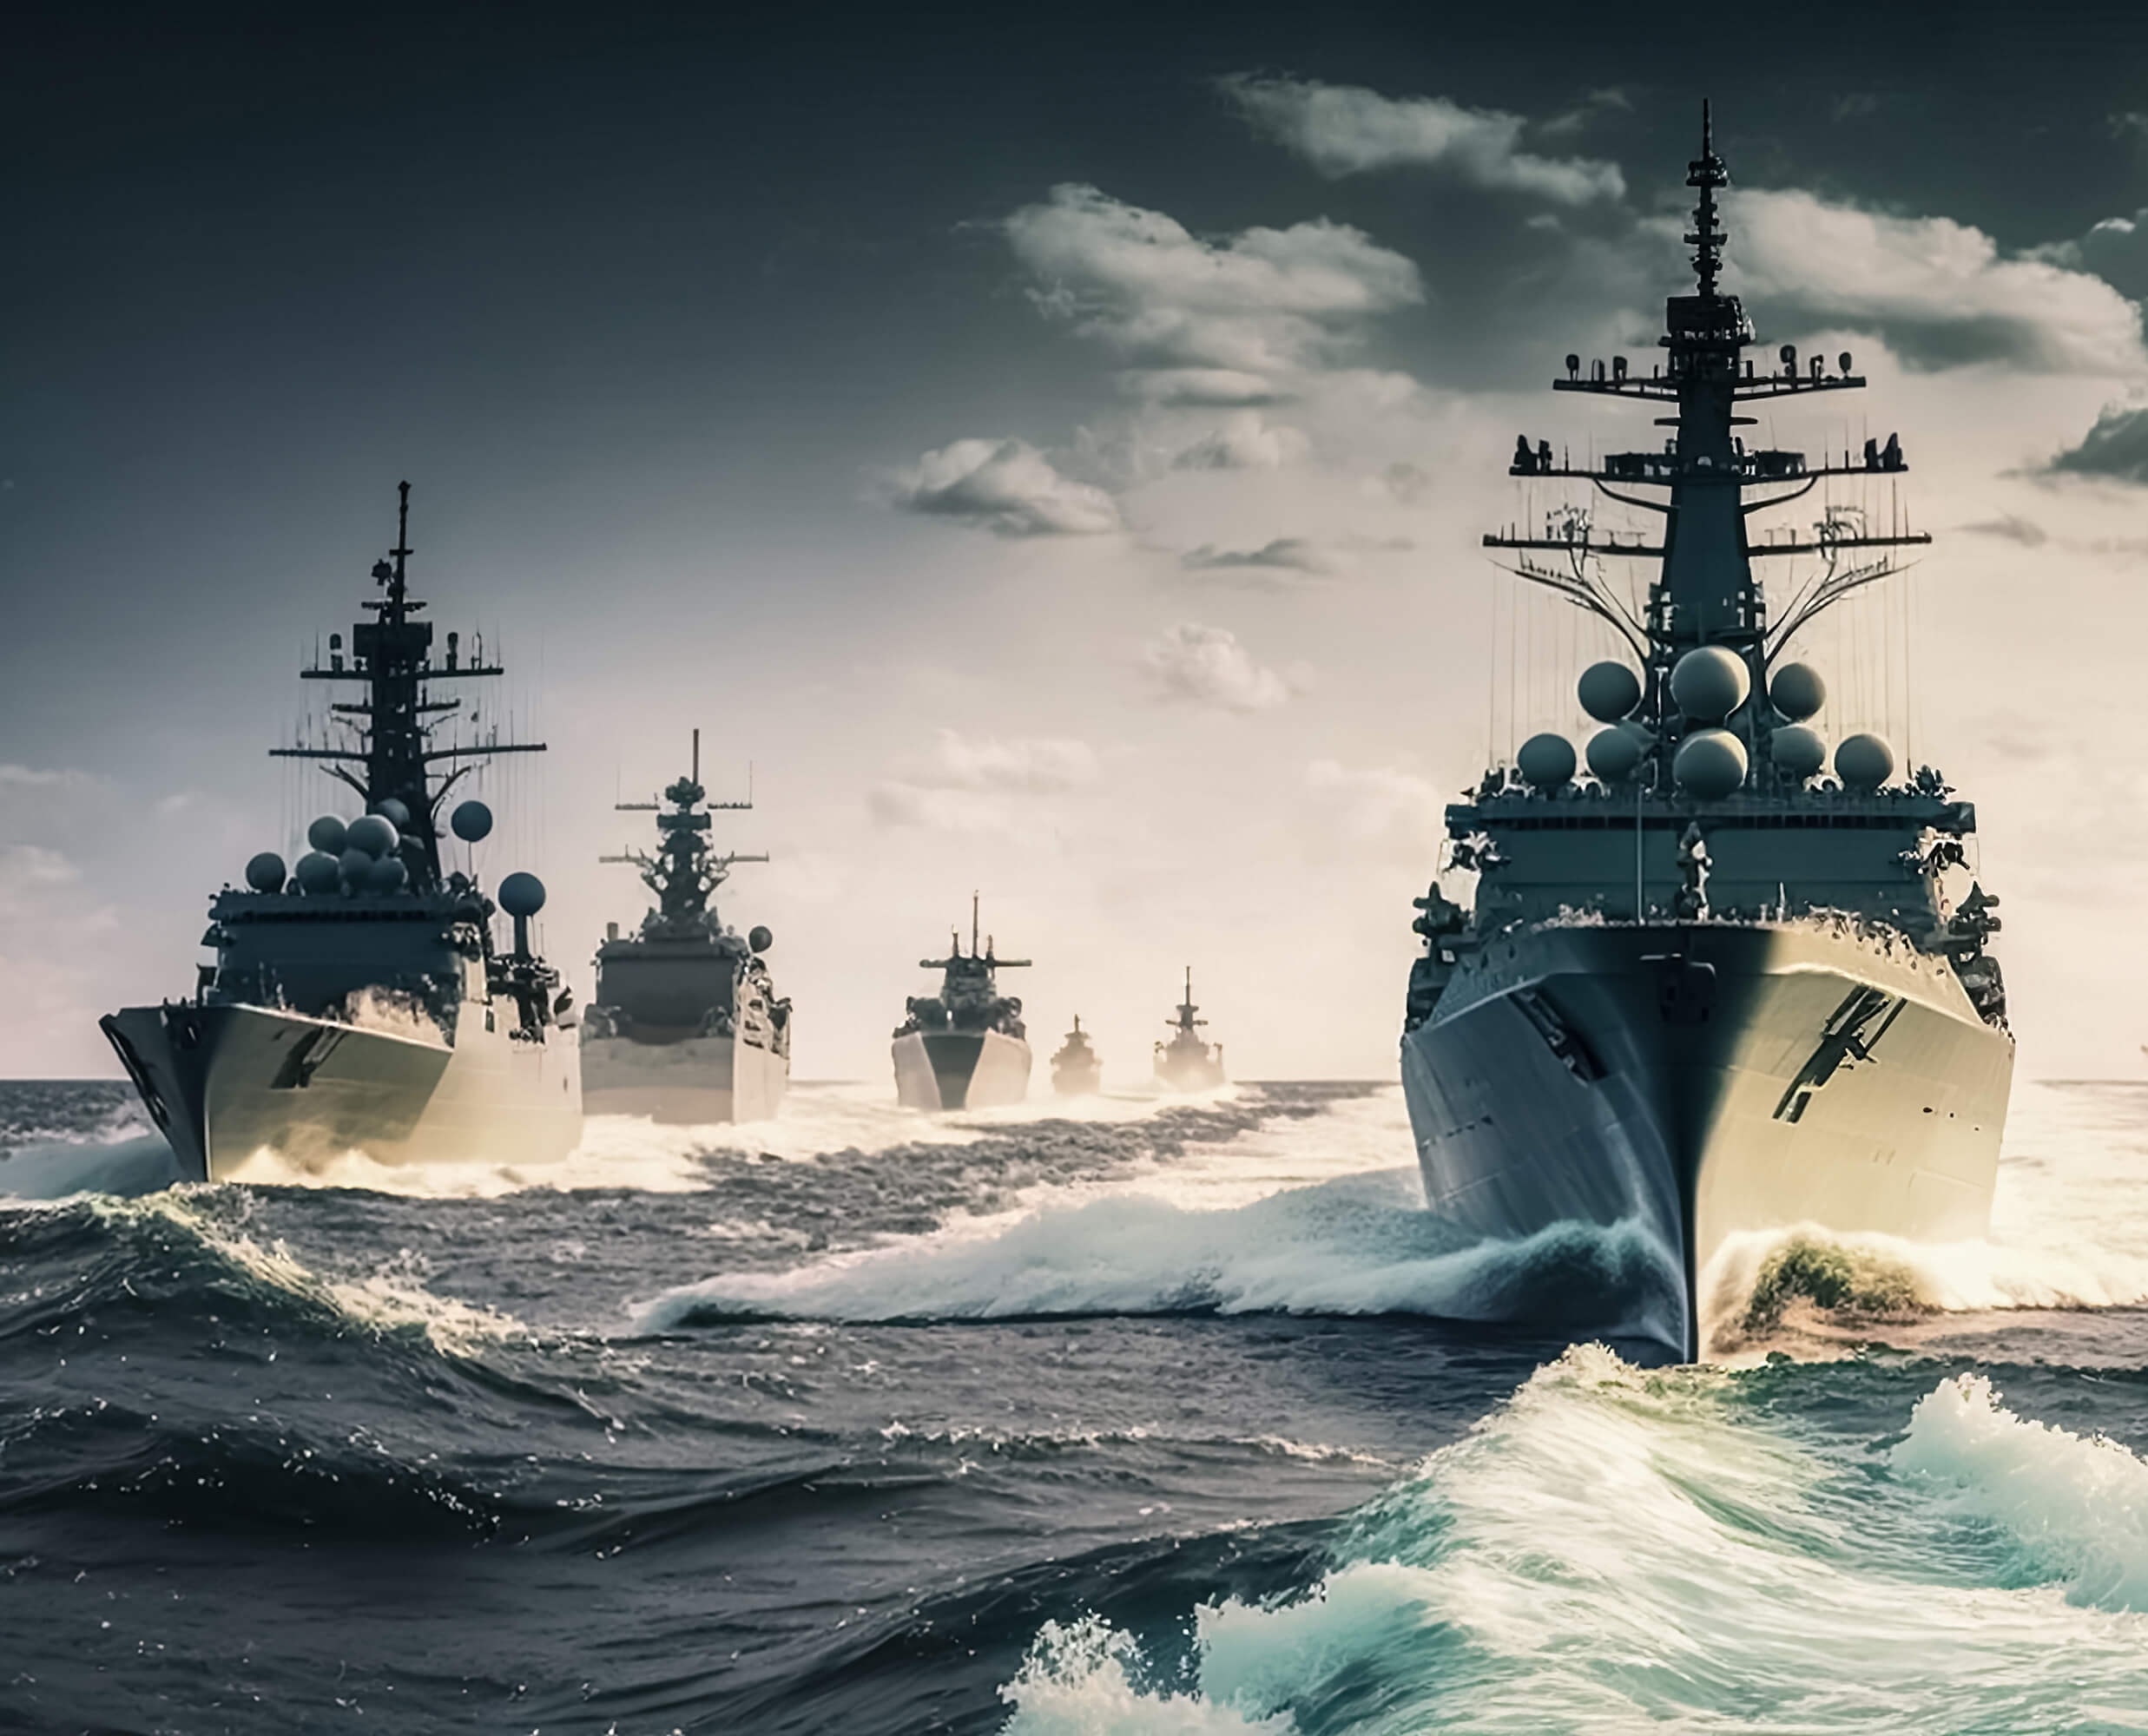 Building Audio Equipment for the US Navy